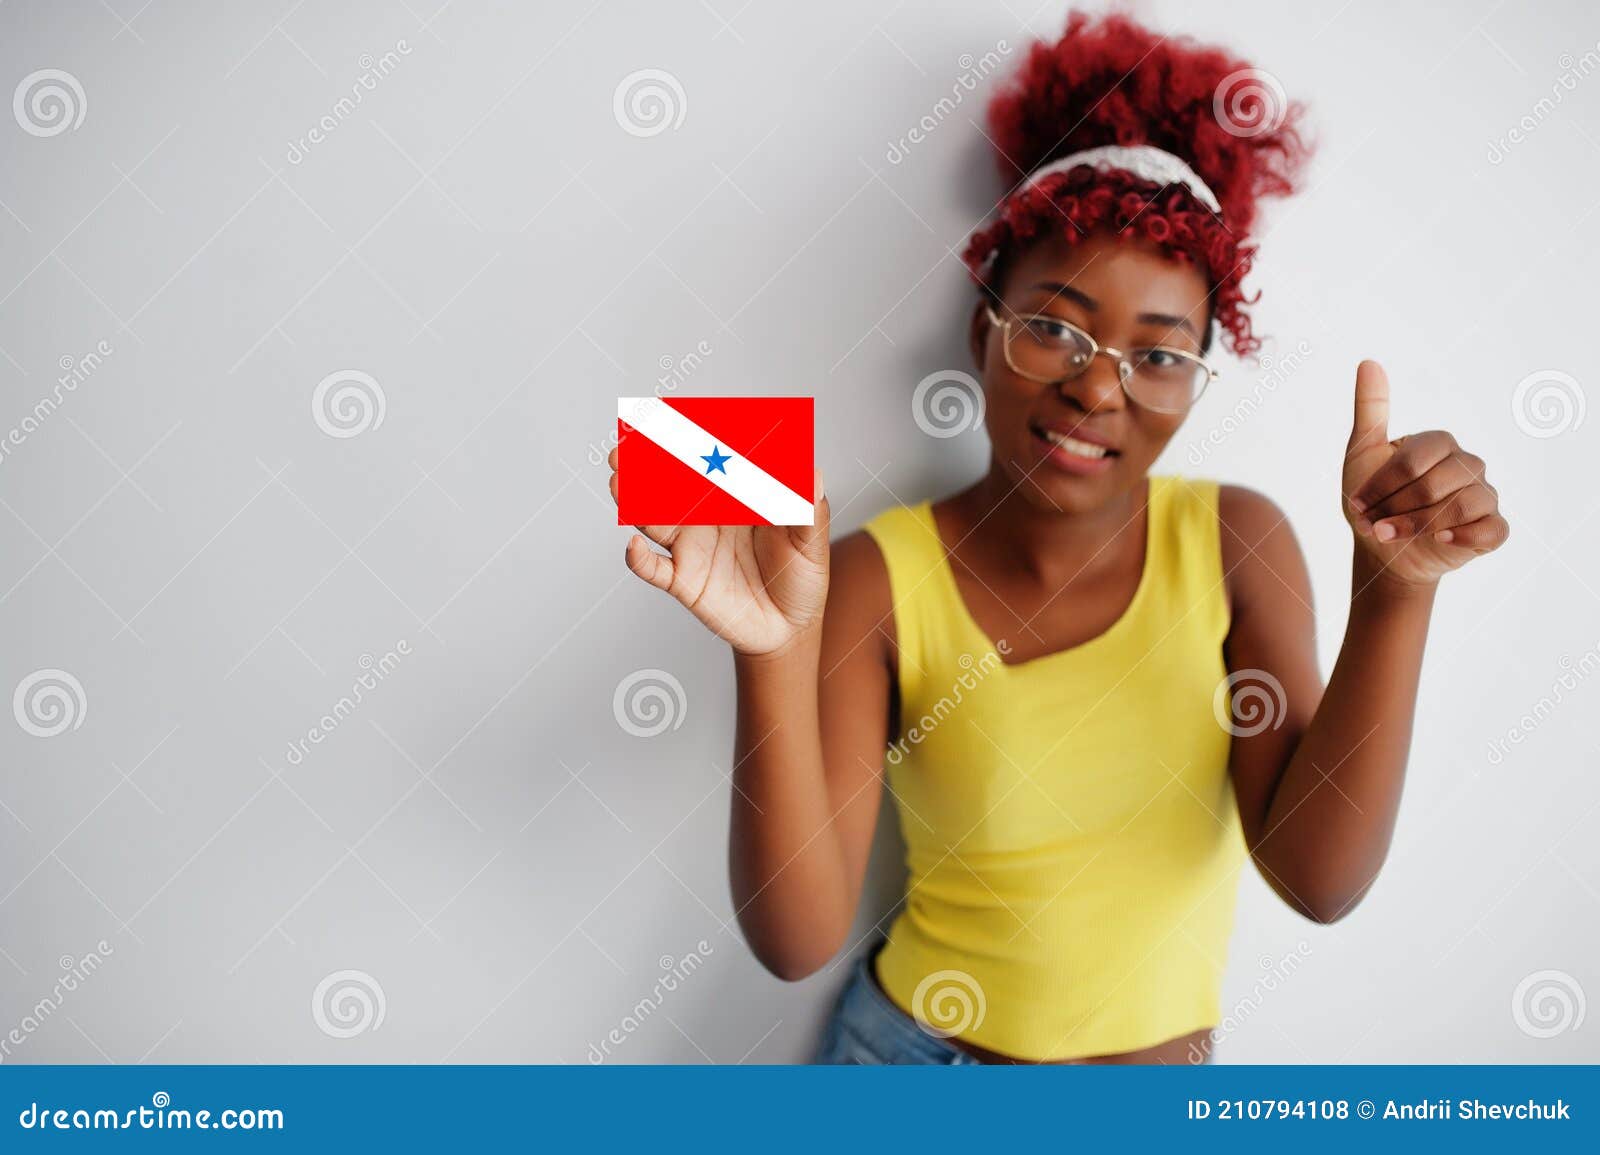 brazilian woman with afro hair hold para flag  on white background, show thumb up. states of brazil concept